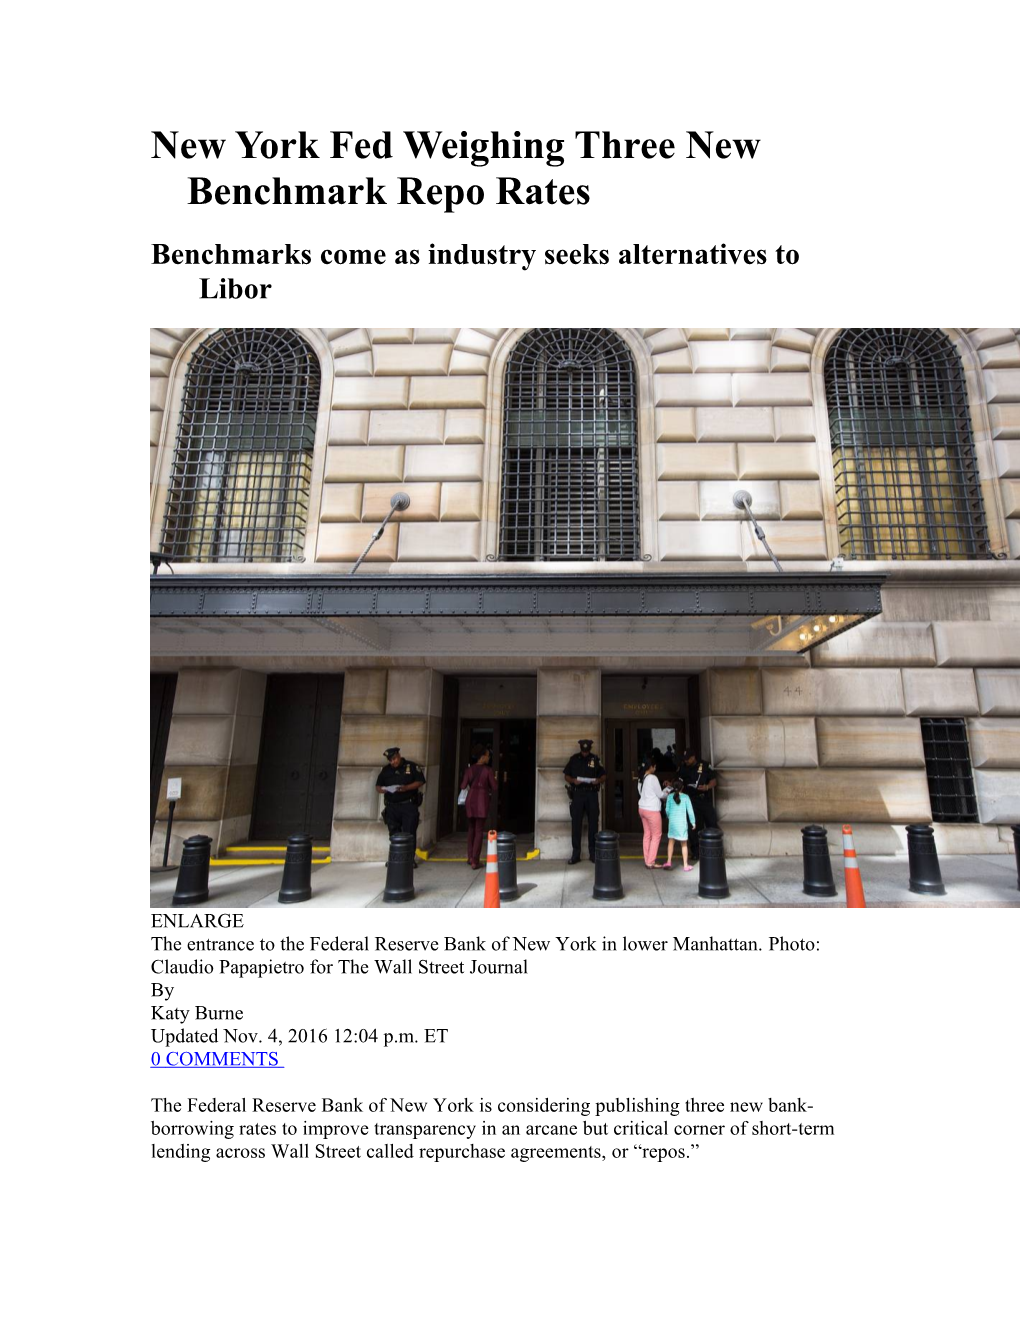 New York Fed Weighing Three New Benchmark Repo Rates